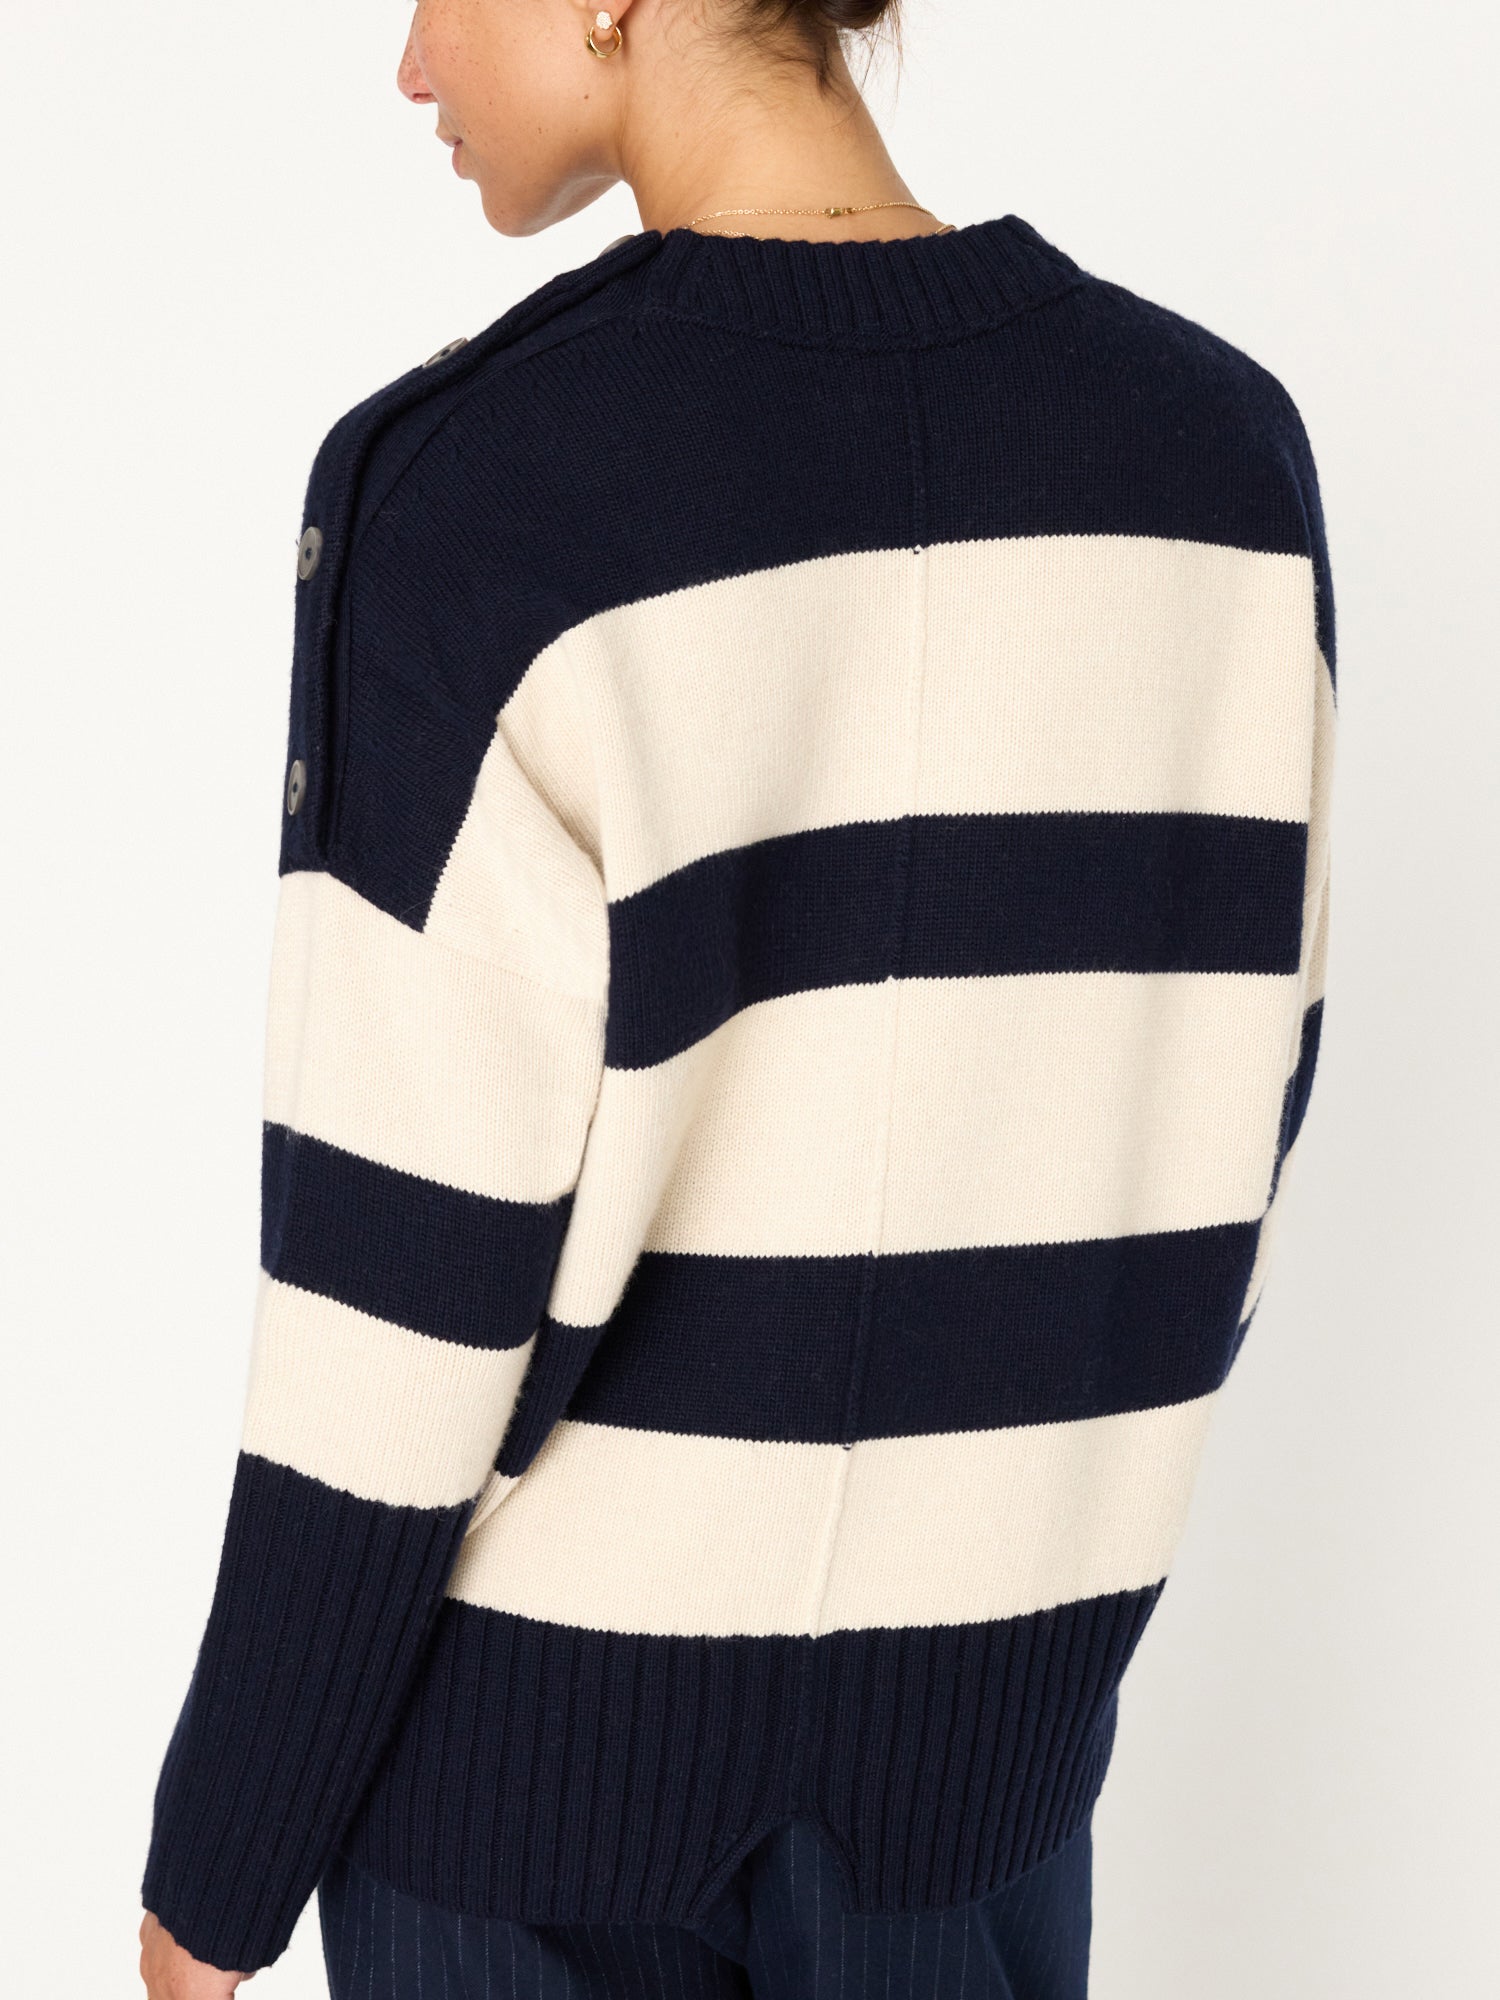 Cy navy and beige stripe crewneck sweater back view